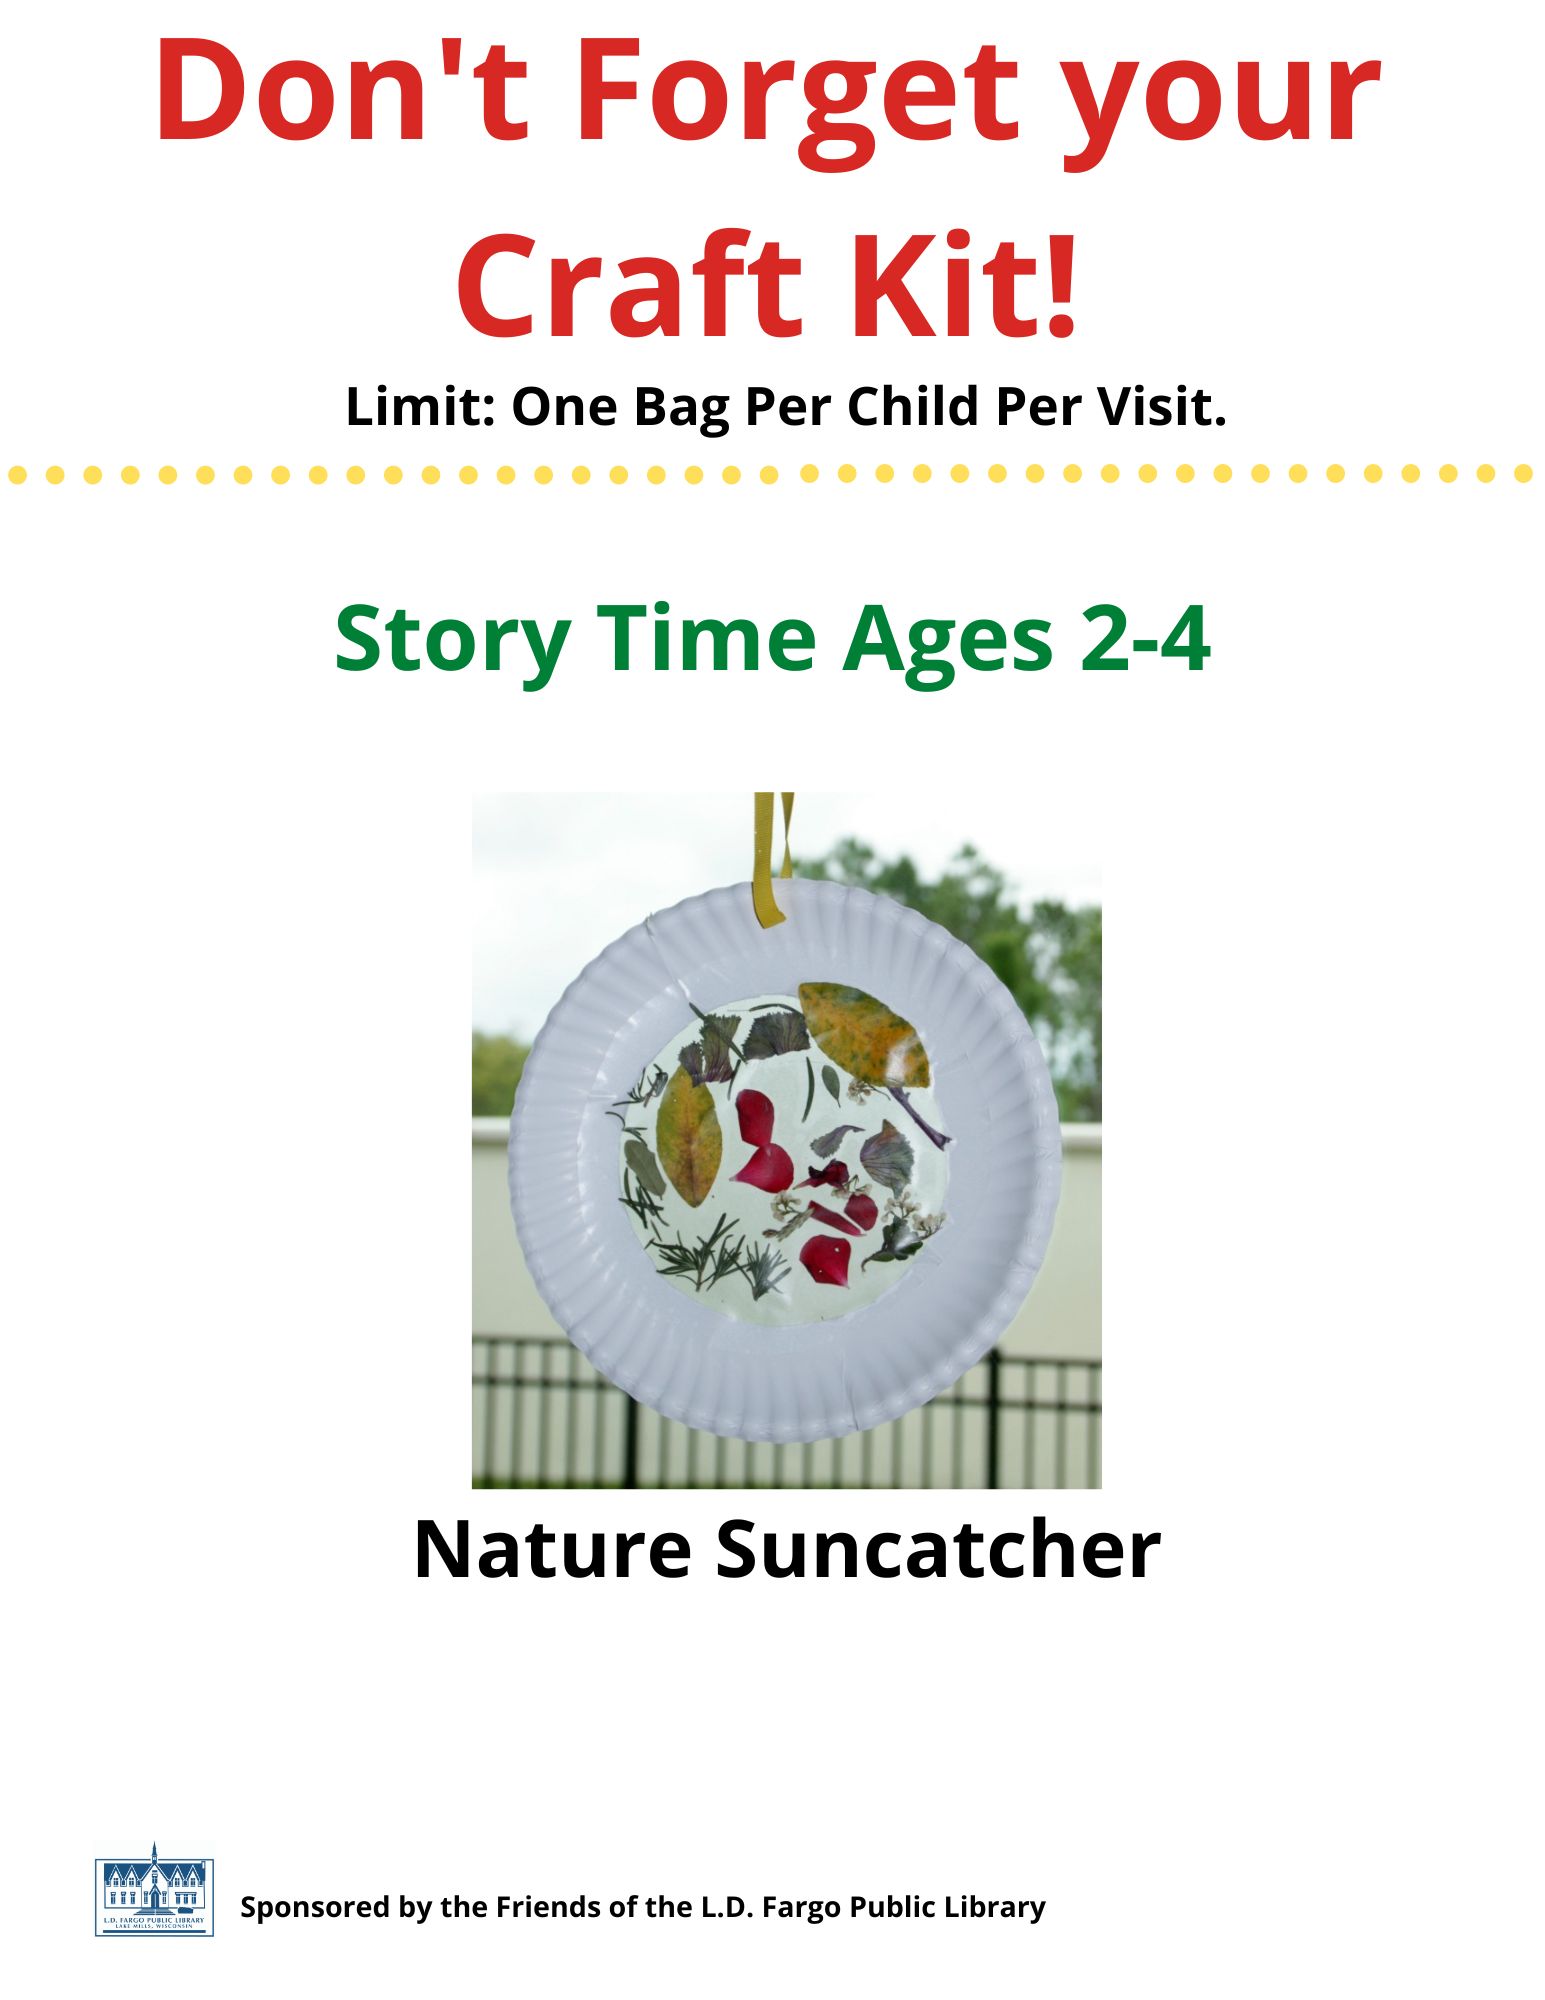 Story Time Craft Kits. Pick up a bag from the library and create your craft at home.